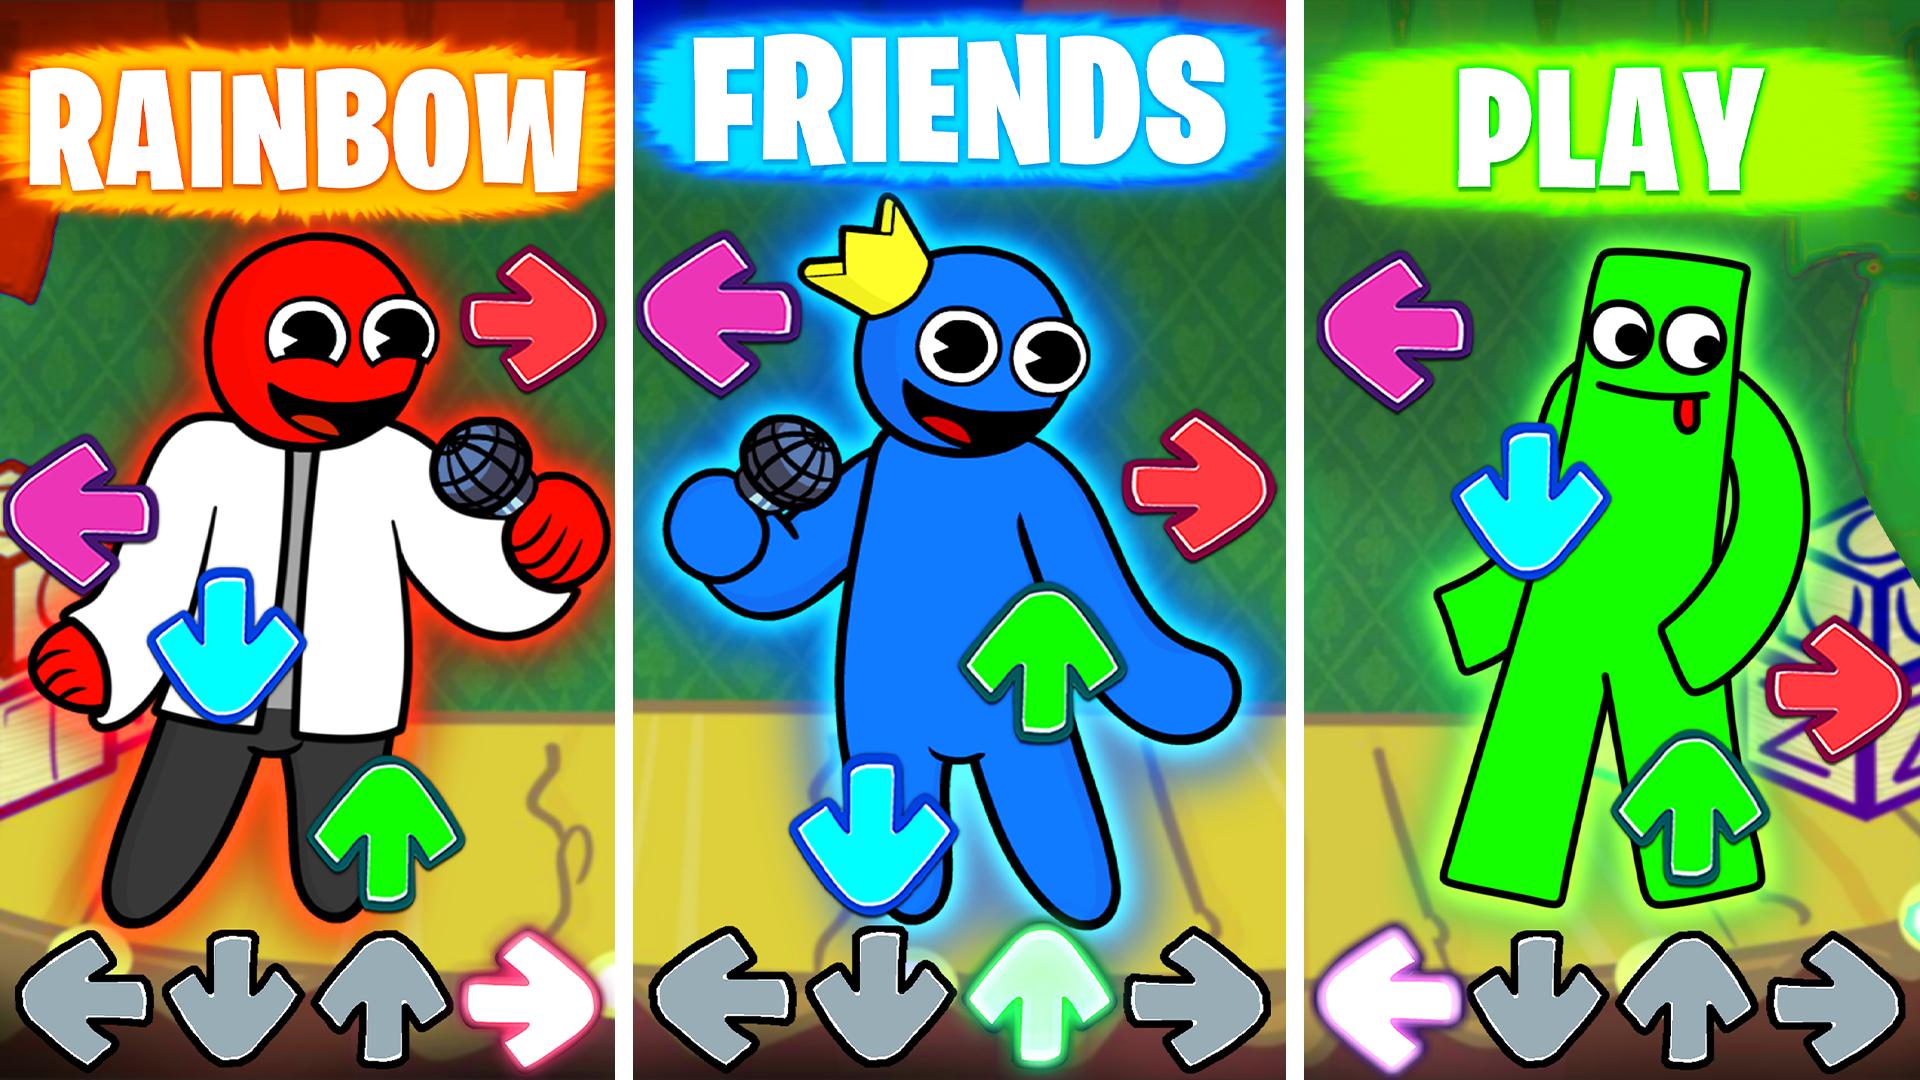 App FNF Green Rainbow Friends Mod Android game 2022 